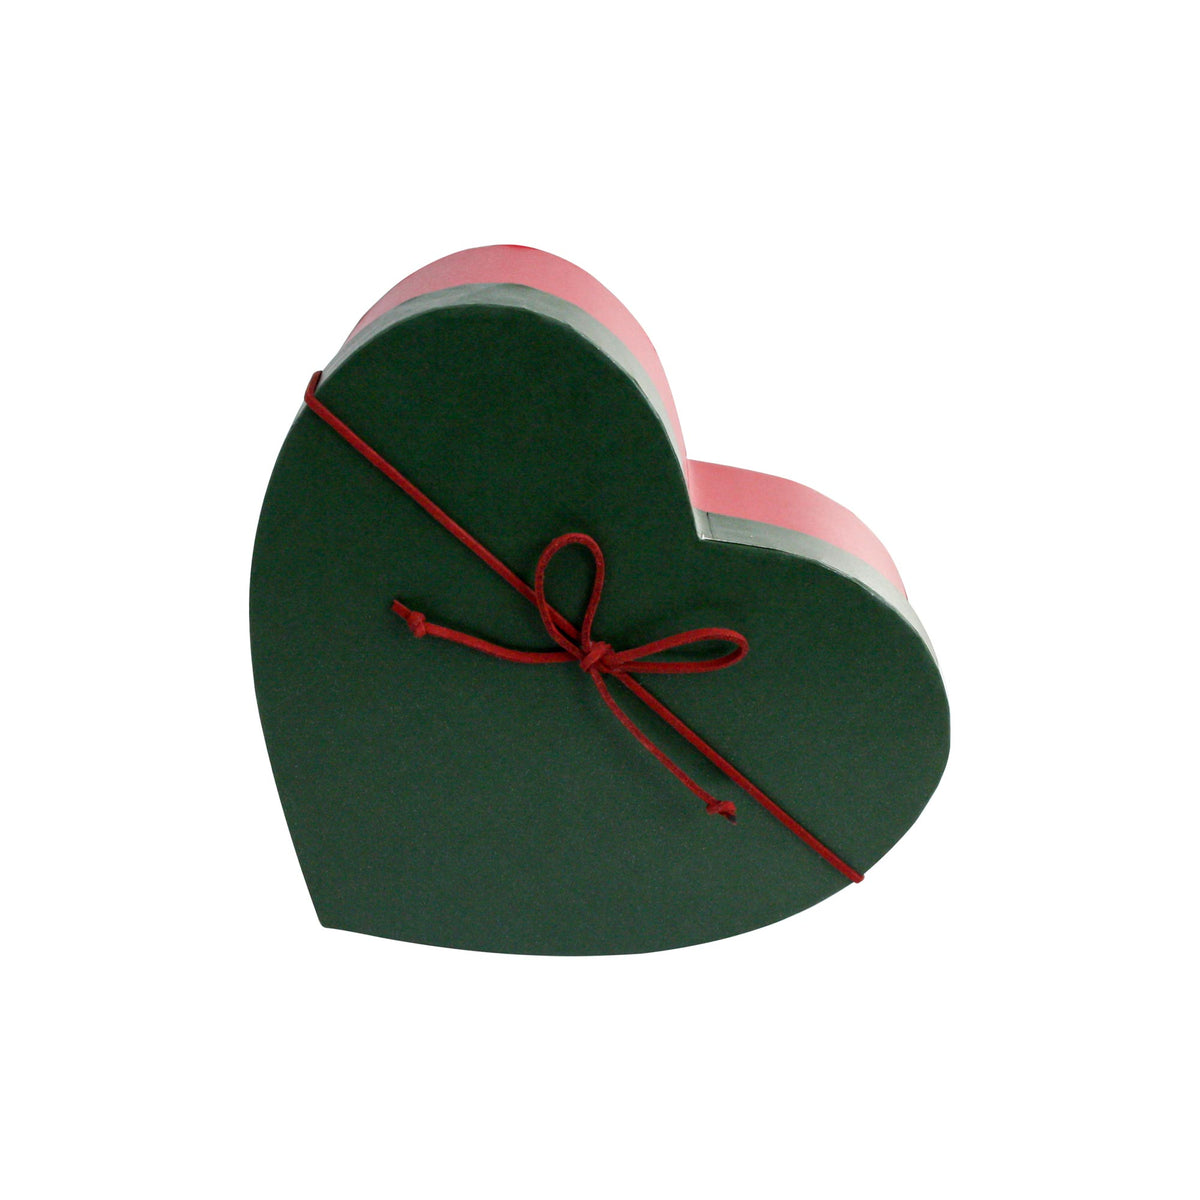 Luxury Heart Shaped Red/Green Gift Box - Single (Sizes Available)